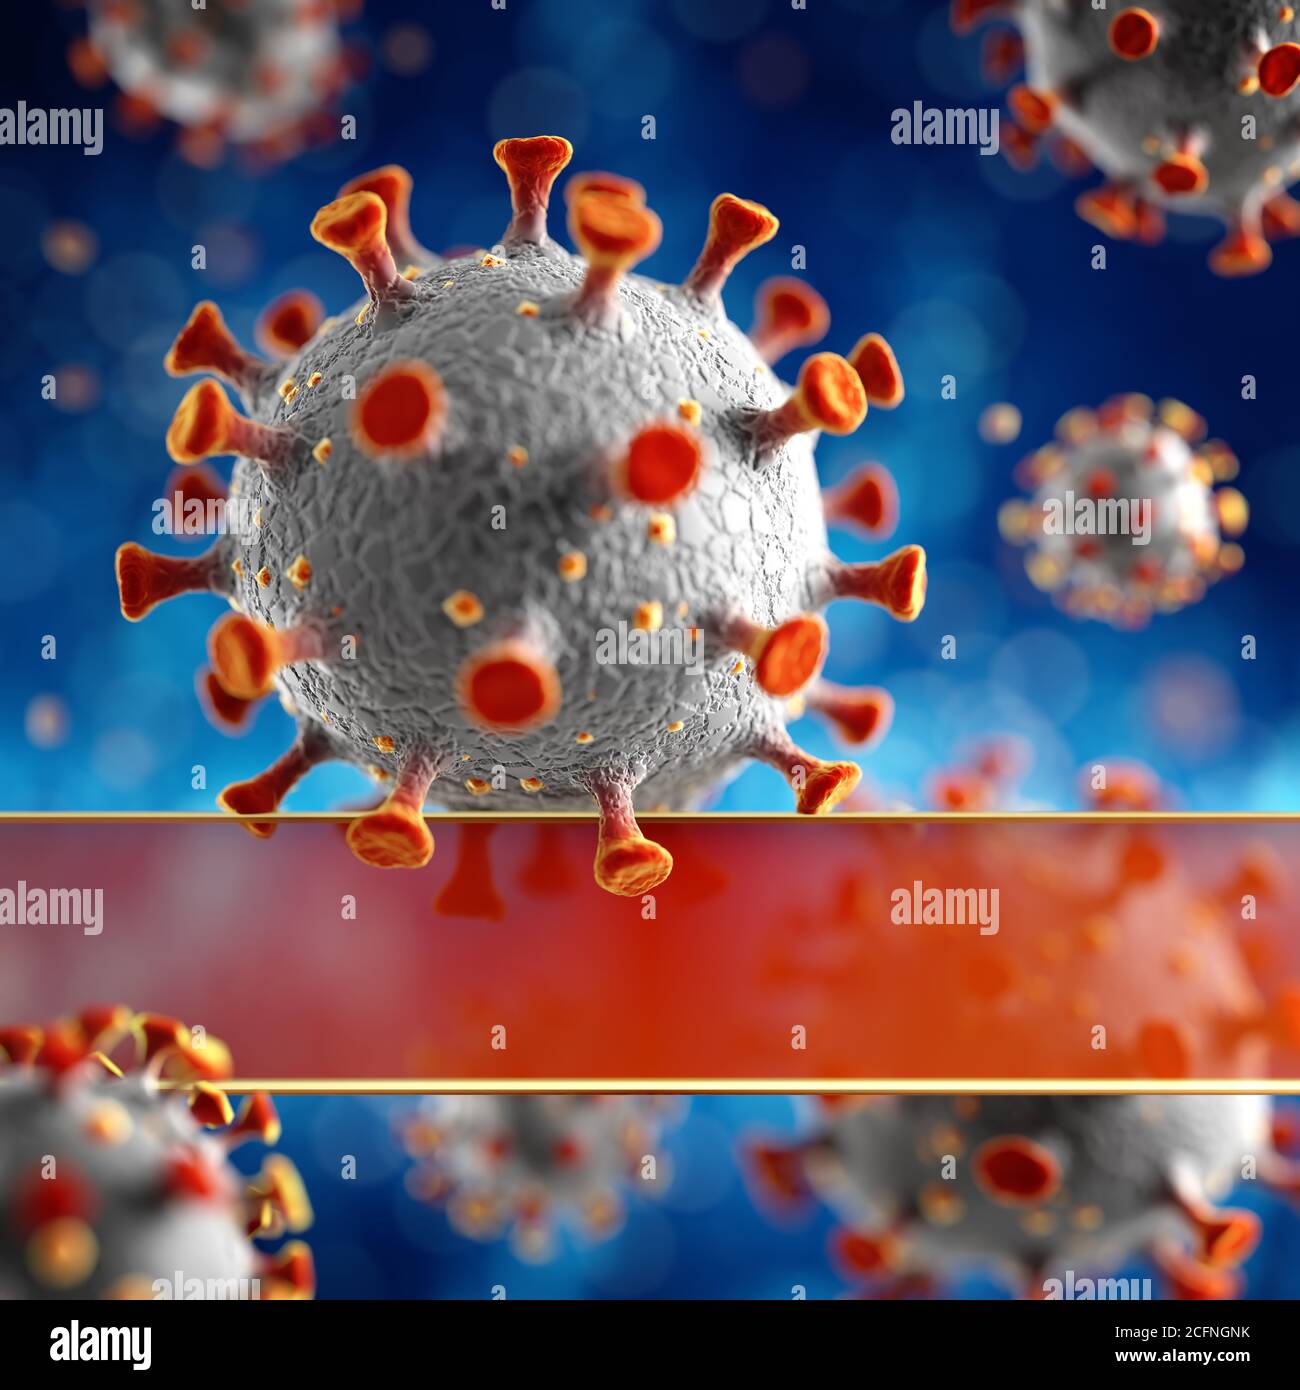 Novel Coronavirus, 2019-nCoV or SARS-CoV-2, cause of the global flu pandemic. Microscopic virus close up concept with blank copyspace for text. 3d ren Stock Photo